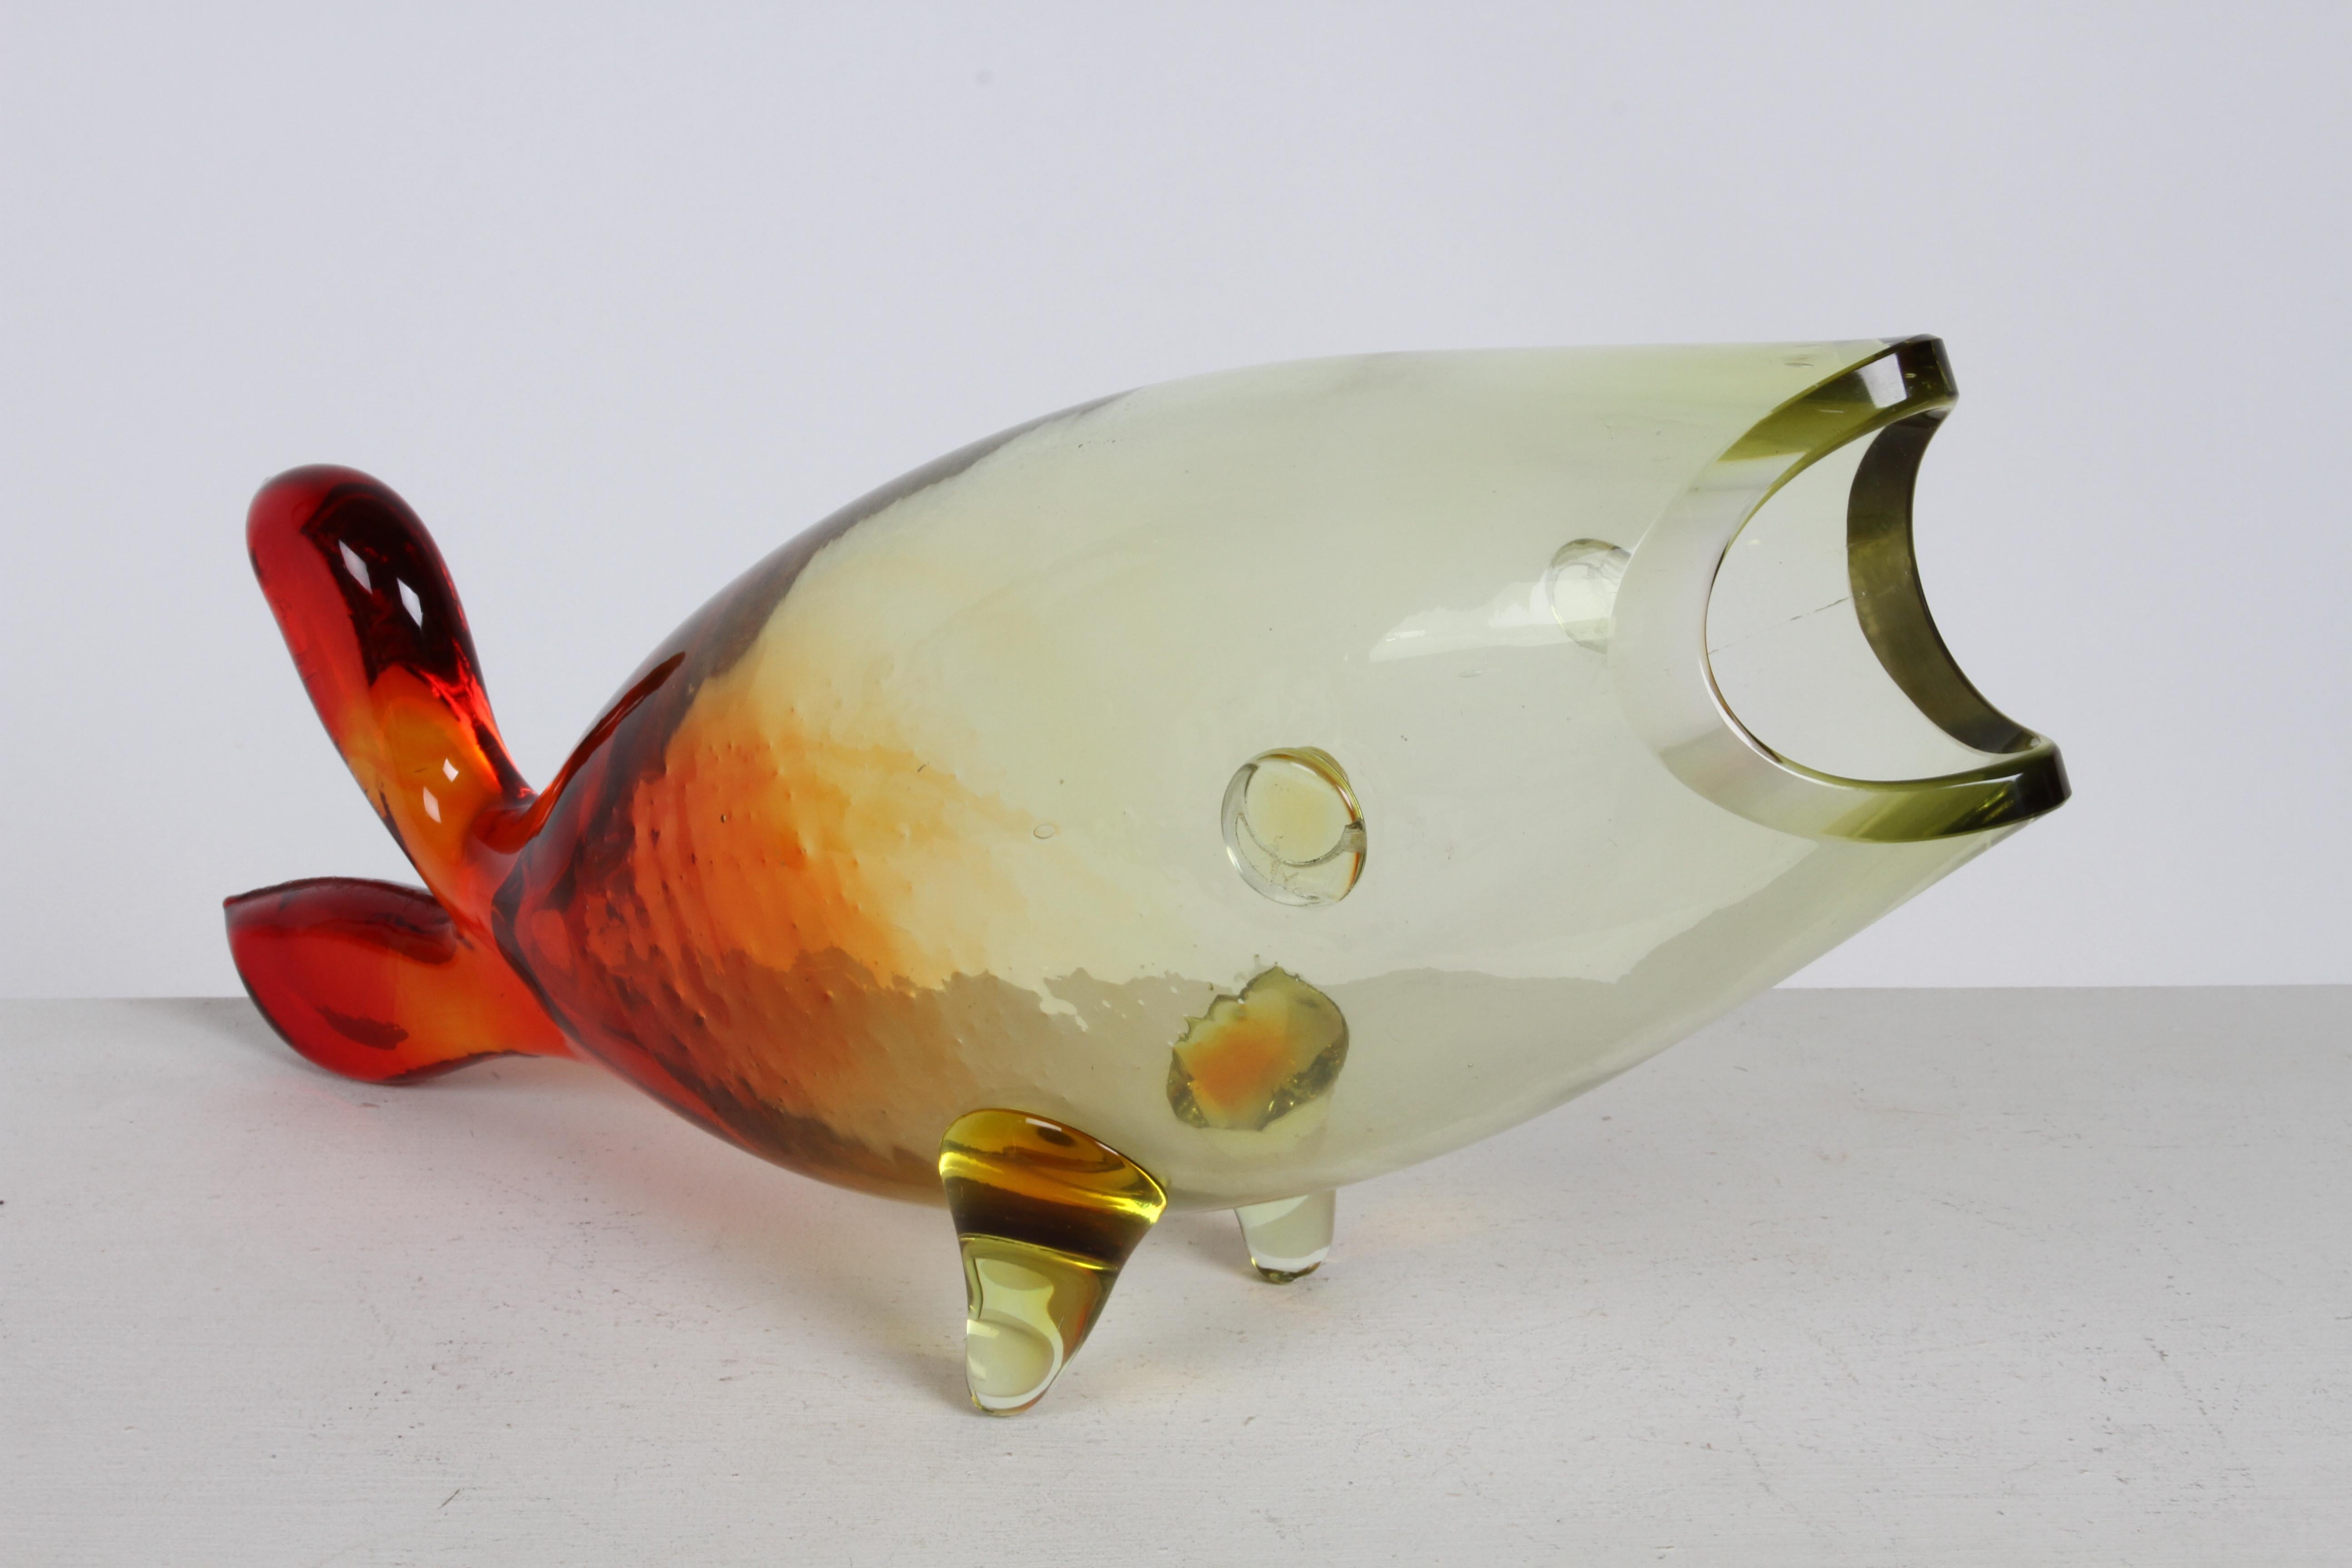 Vintage Blenko Hand Blown Glass Yellow-Red Fish Sculpture by Winslow Anderson For Sale 3